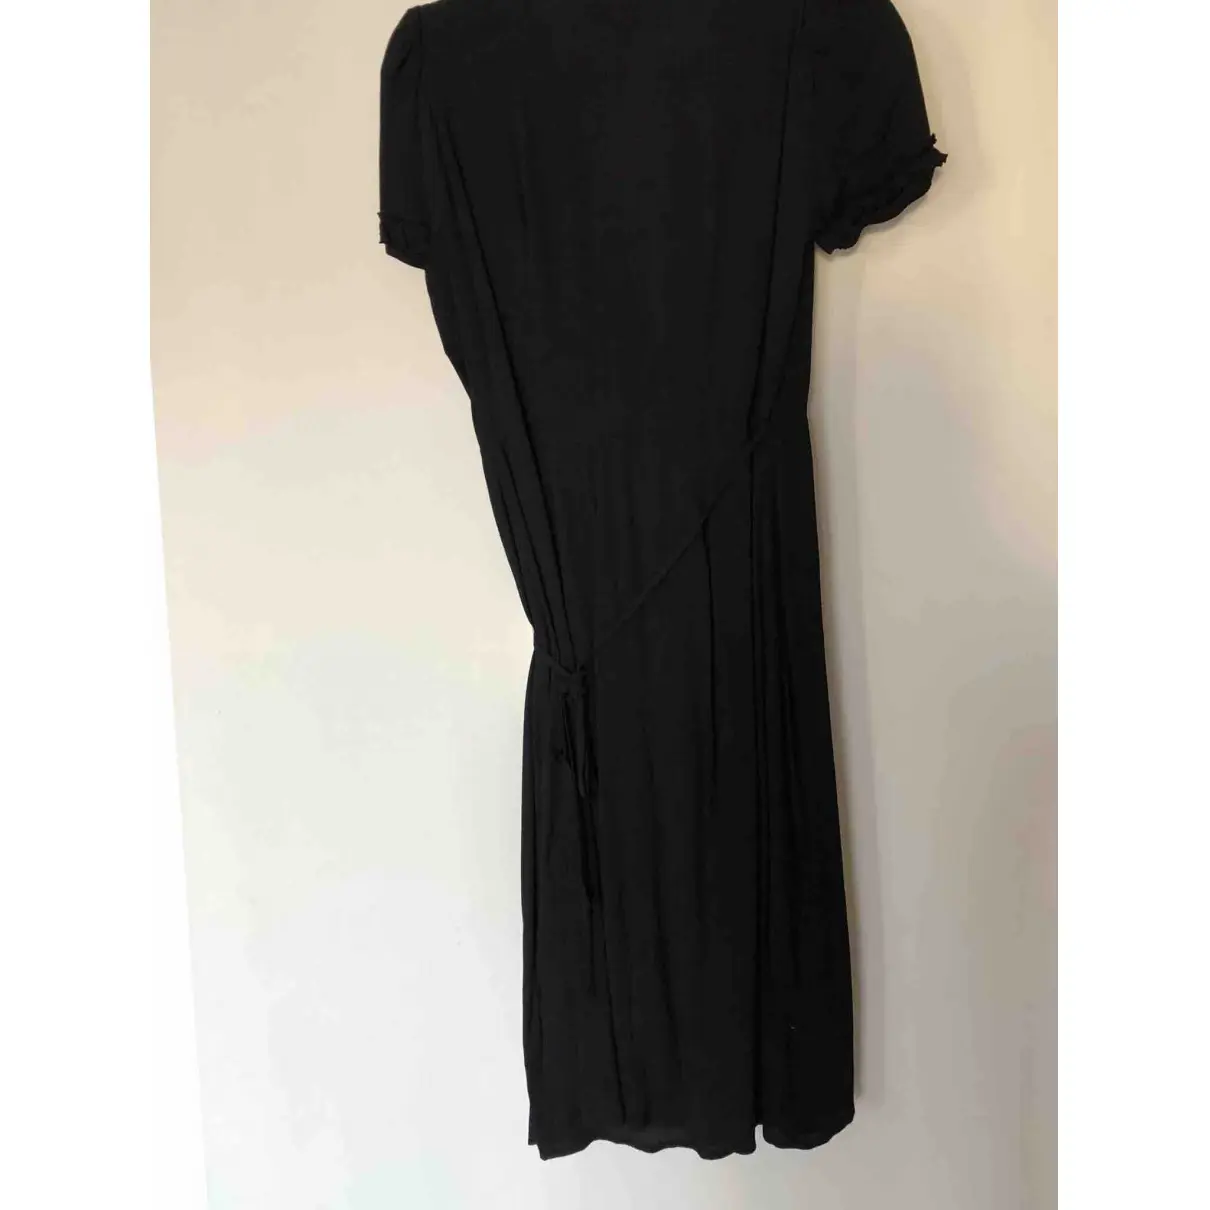 Reformation Mid-length dress for sale